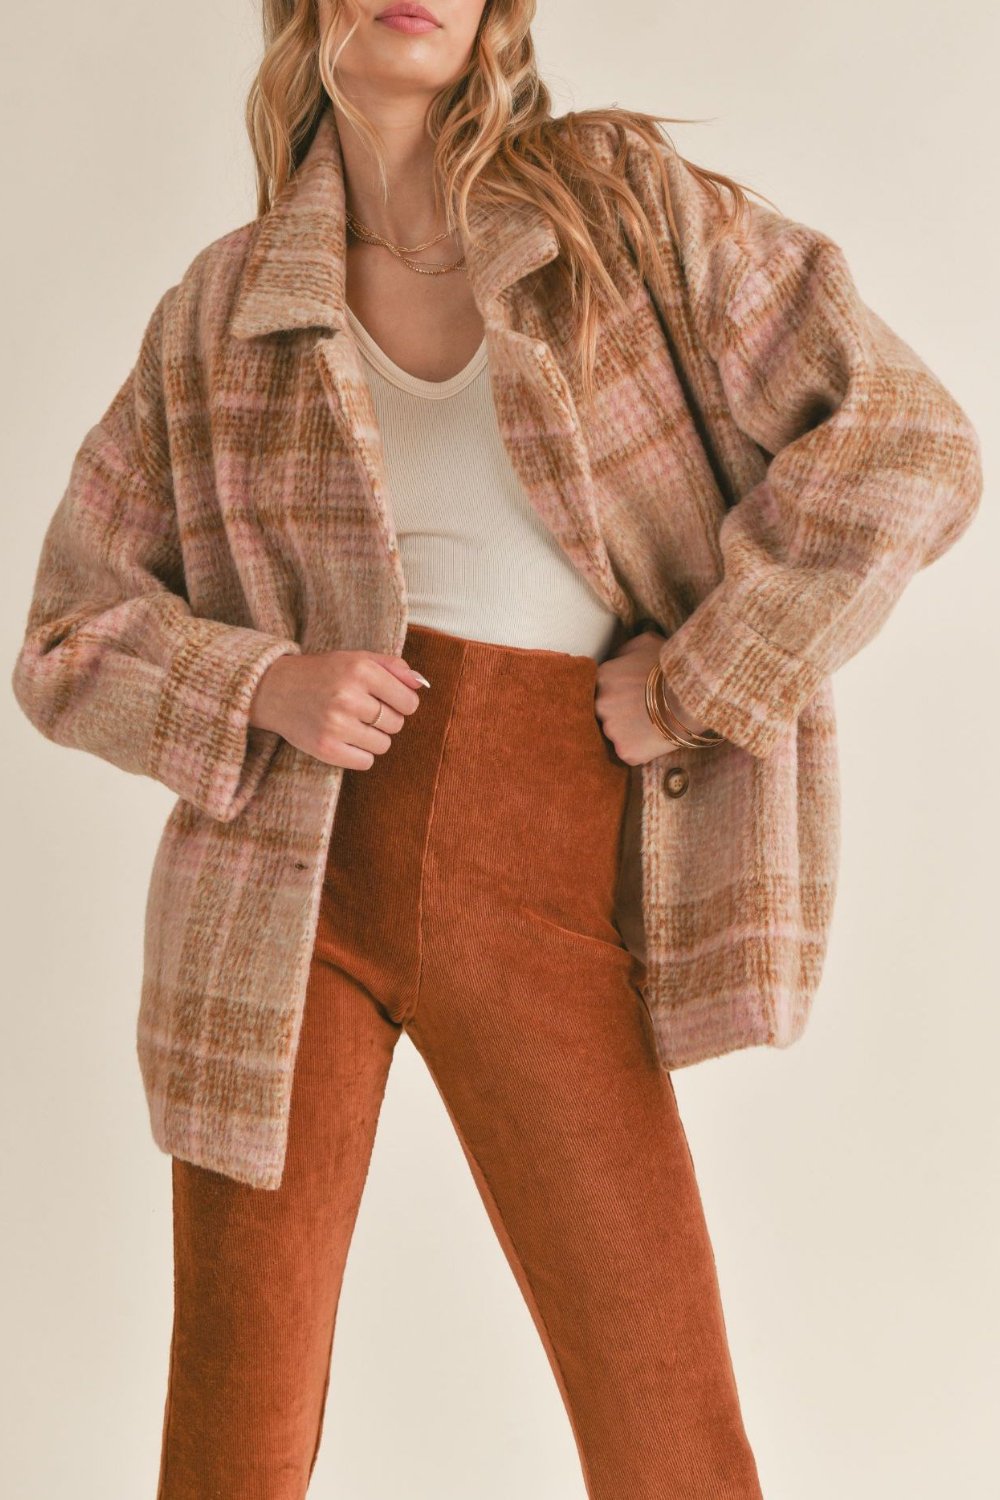 Women's Vintage Fit Plaid Shacket Coat | Camel Pink - Women's Jacket - Blooming Daily